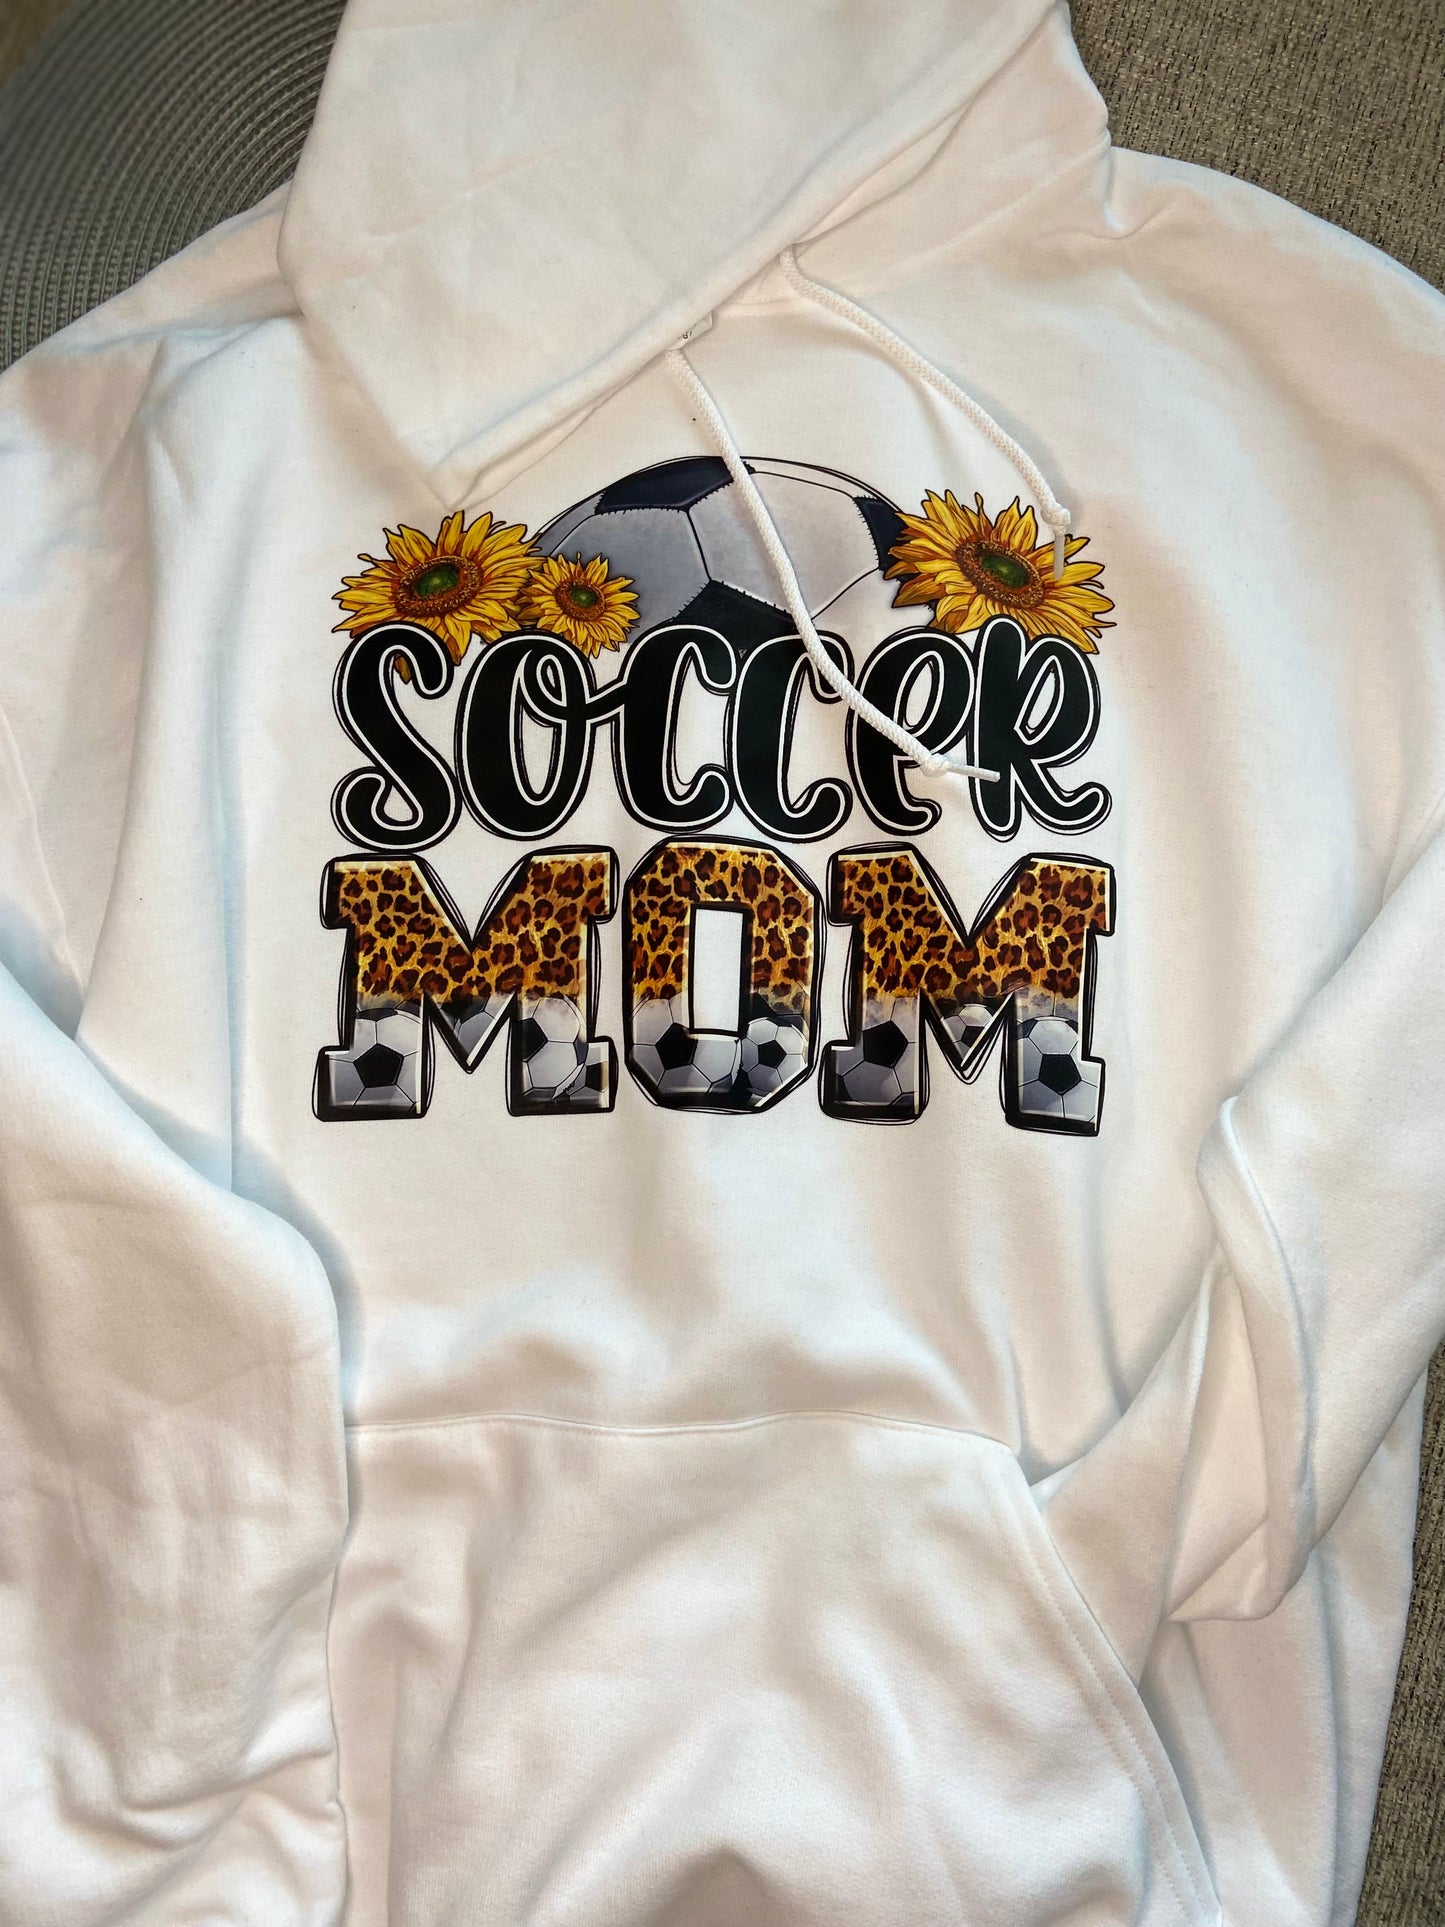 Soccer Mom Tee shirt, Crew or Hoodie Sweatshirt, Soccer Mom bright color print for the Proud soccer Mom, a Great Gift